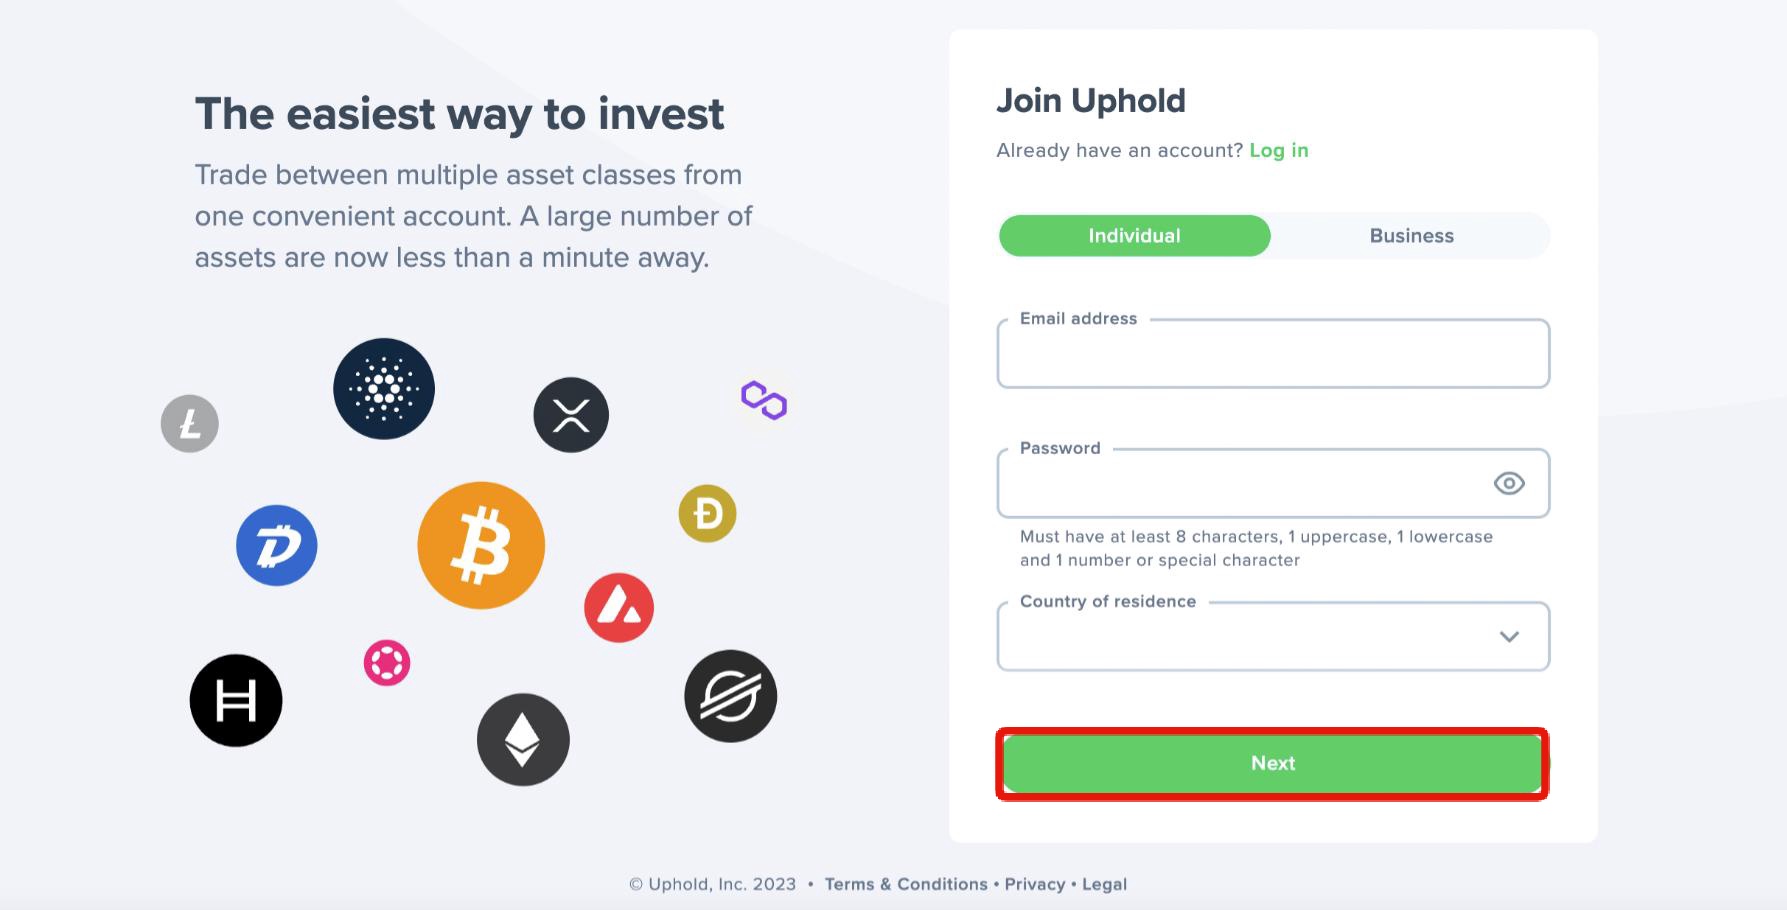 uphold review